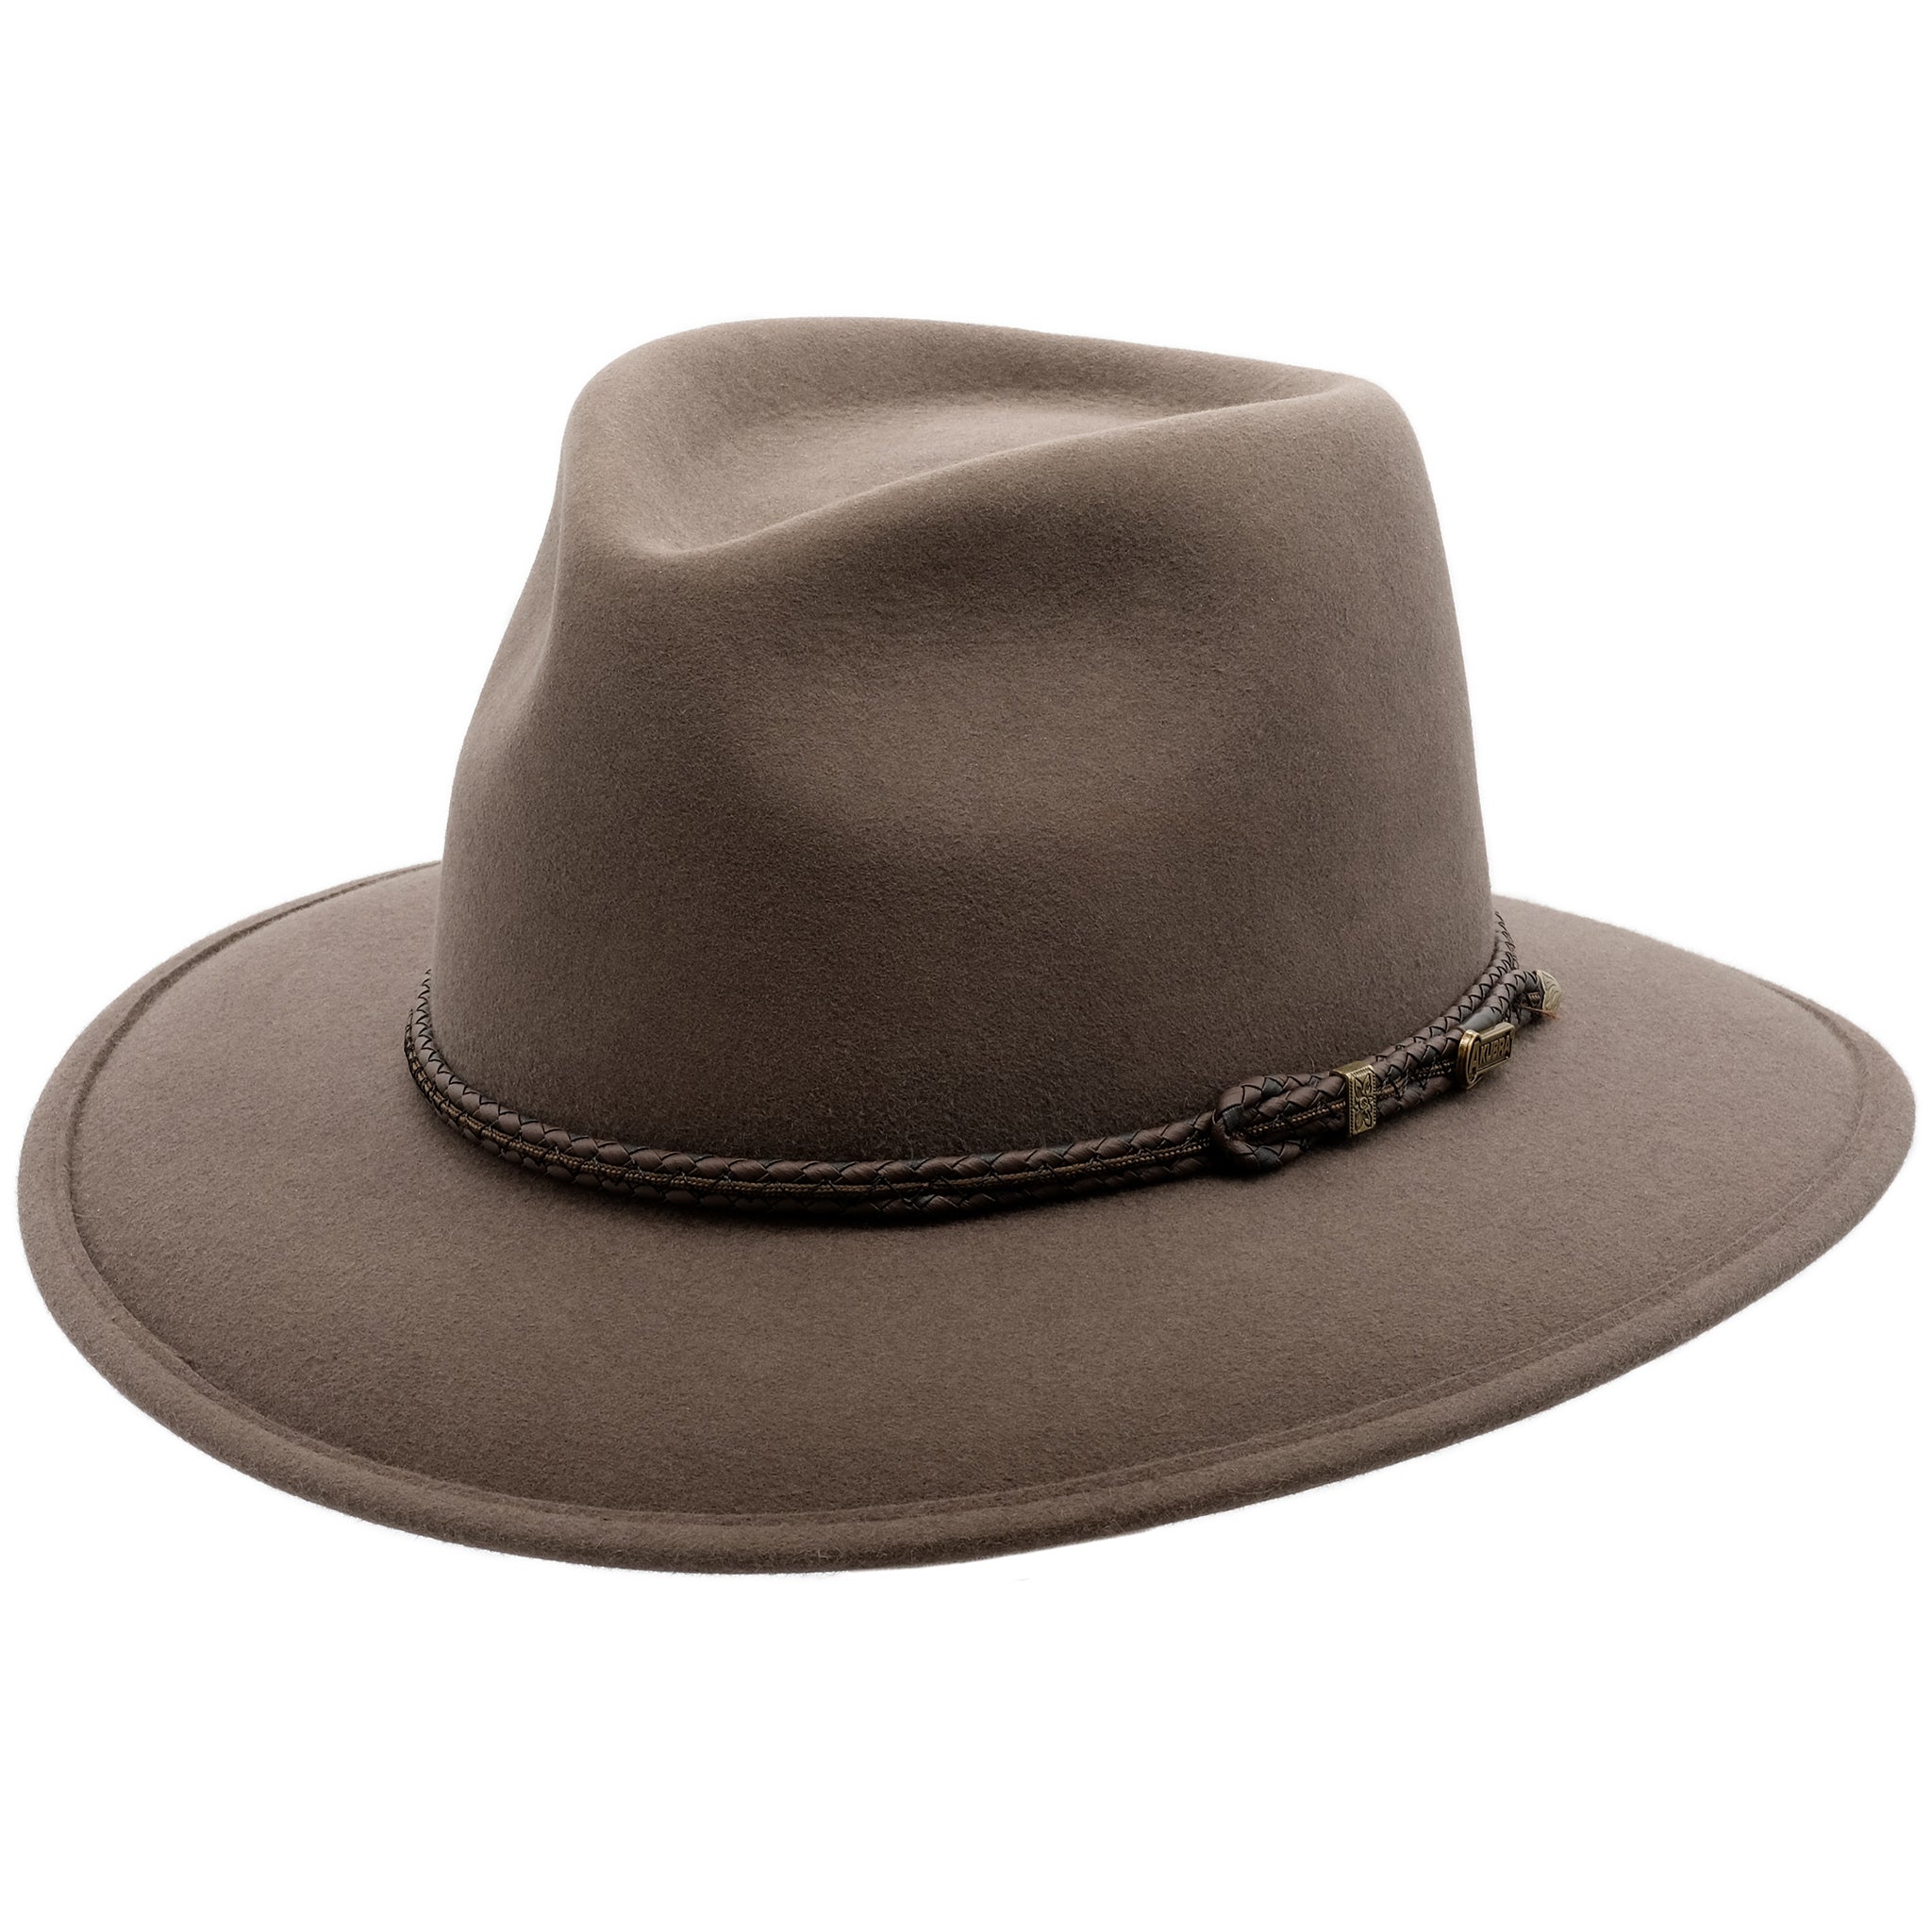 angle view of the Akubra Traveller style hat in Regency fawn